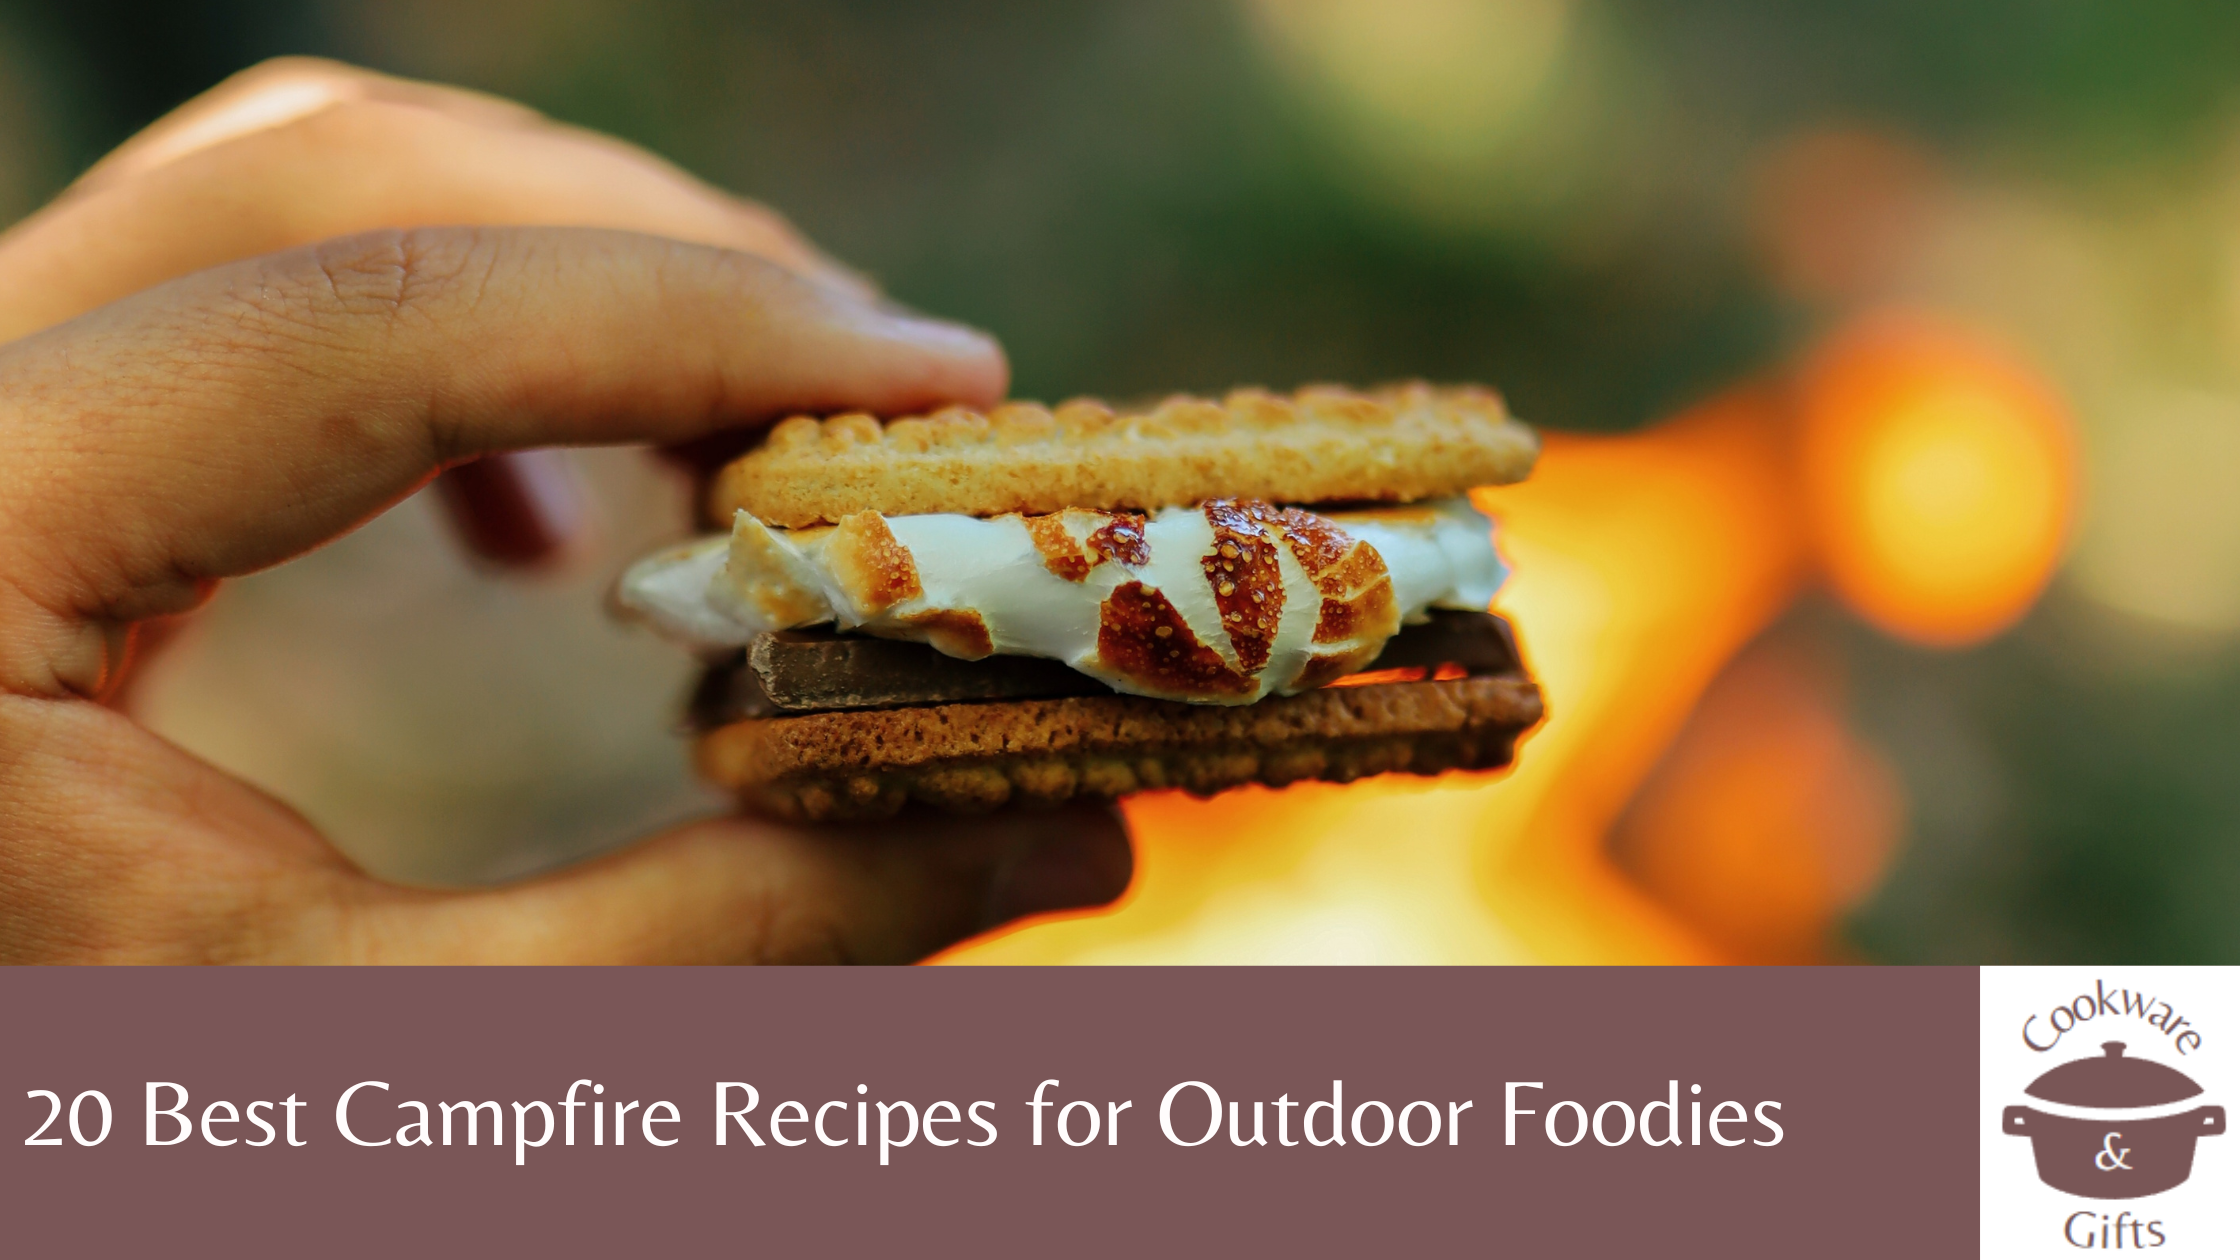 20 of the Best Campfire Recipes for Outdoor Foodies